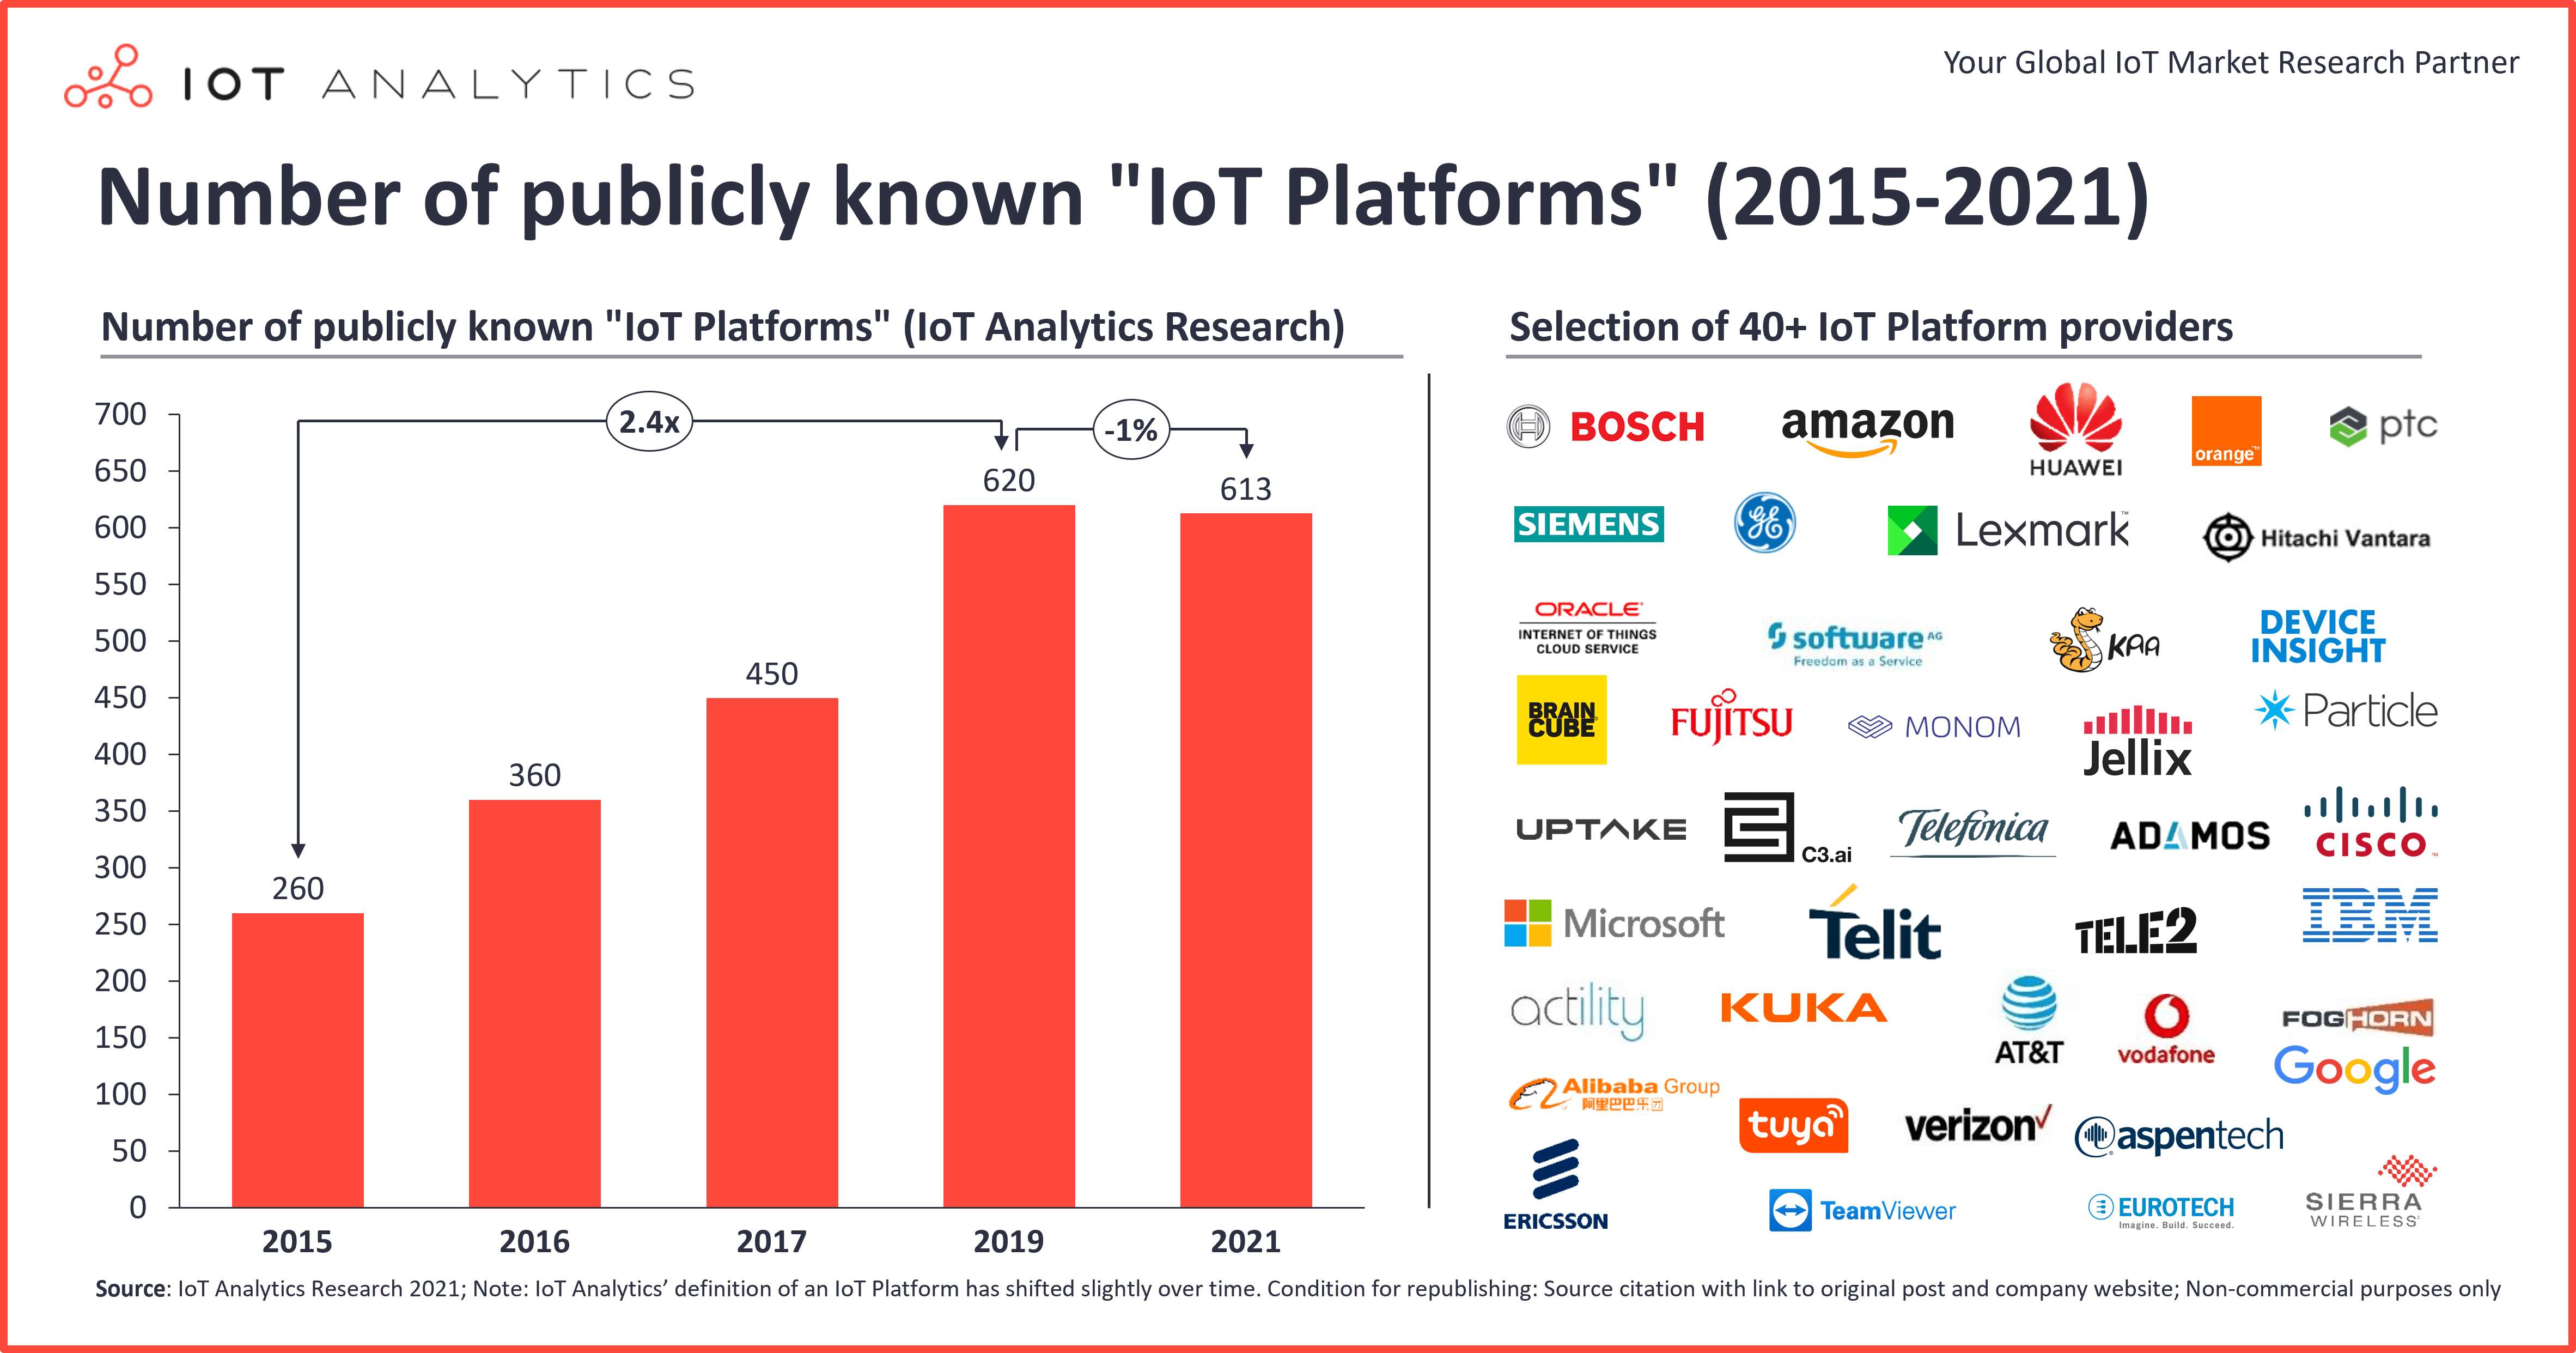 Number of publicly known IoT Platforms 2015  to 2021